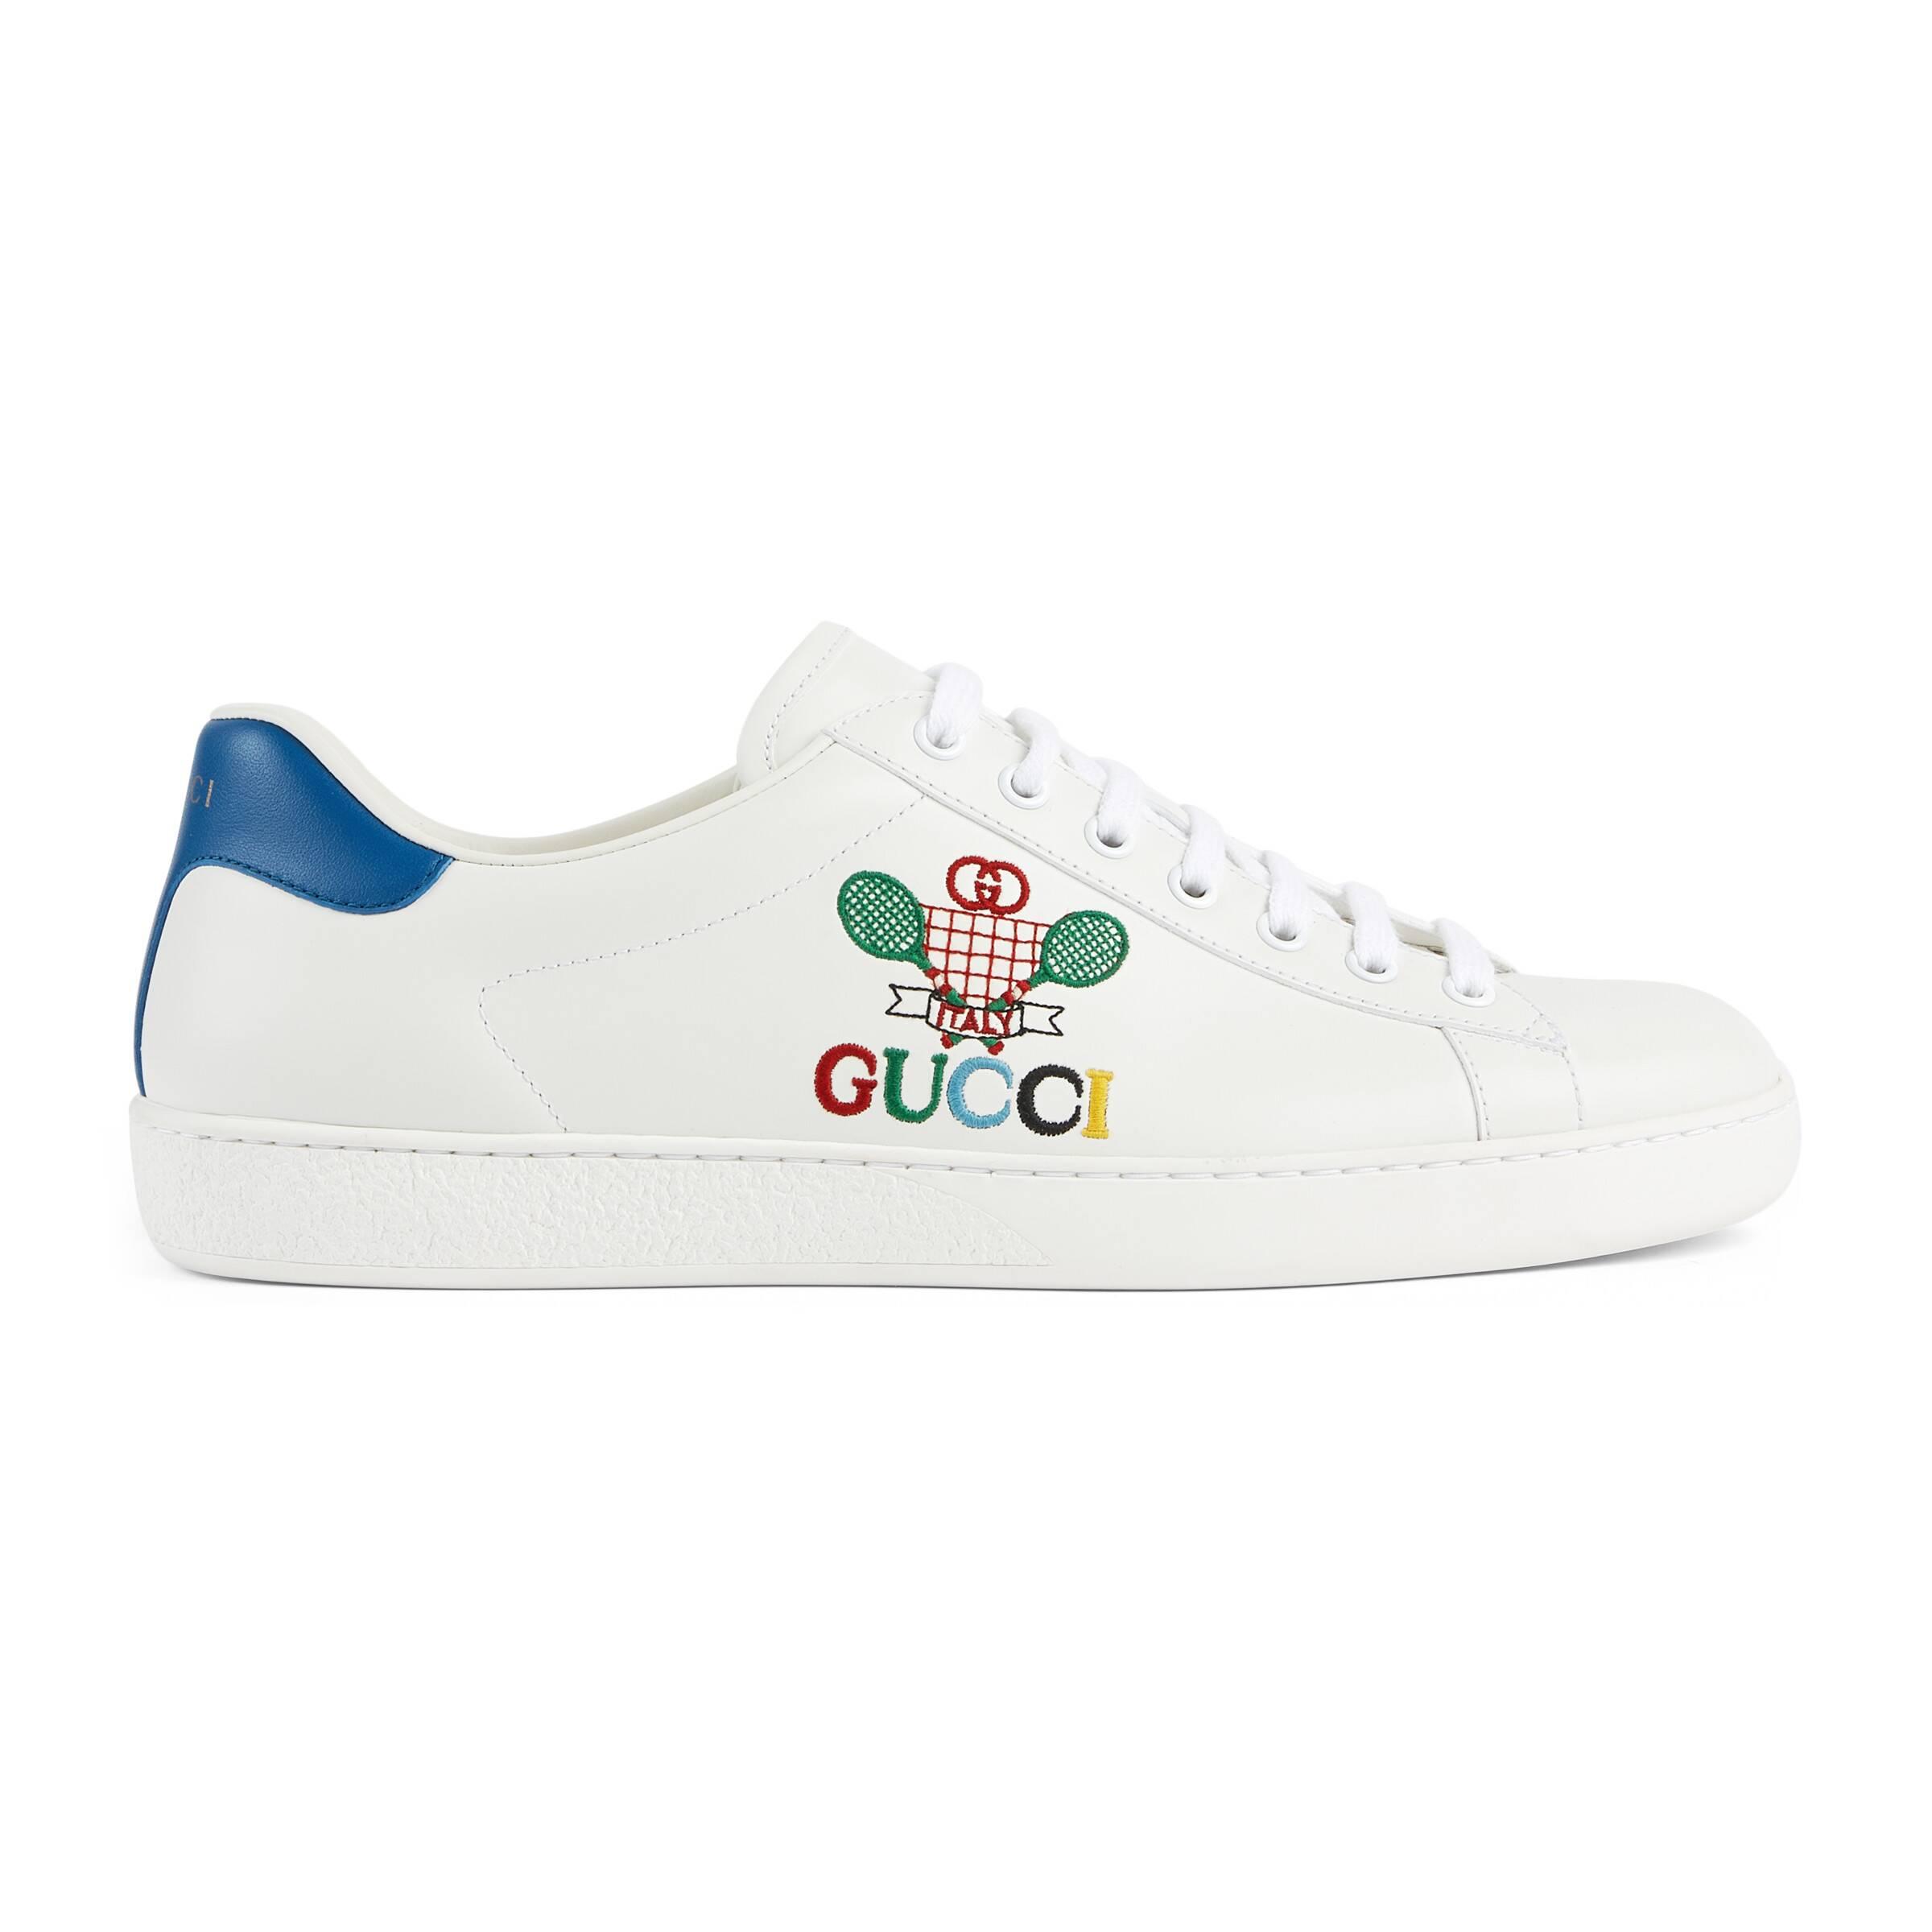 Gucci Leather New Ace Tennis Bee Sneaker in White for Men - Lyst